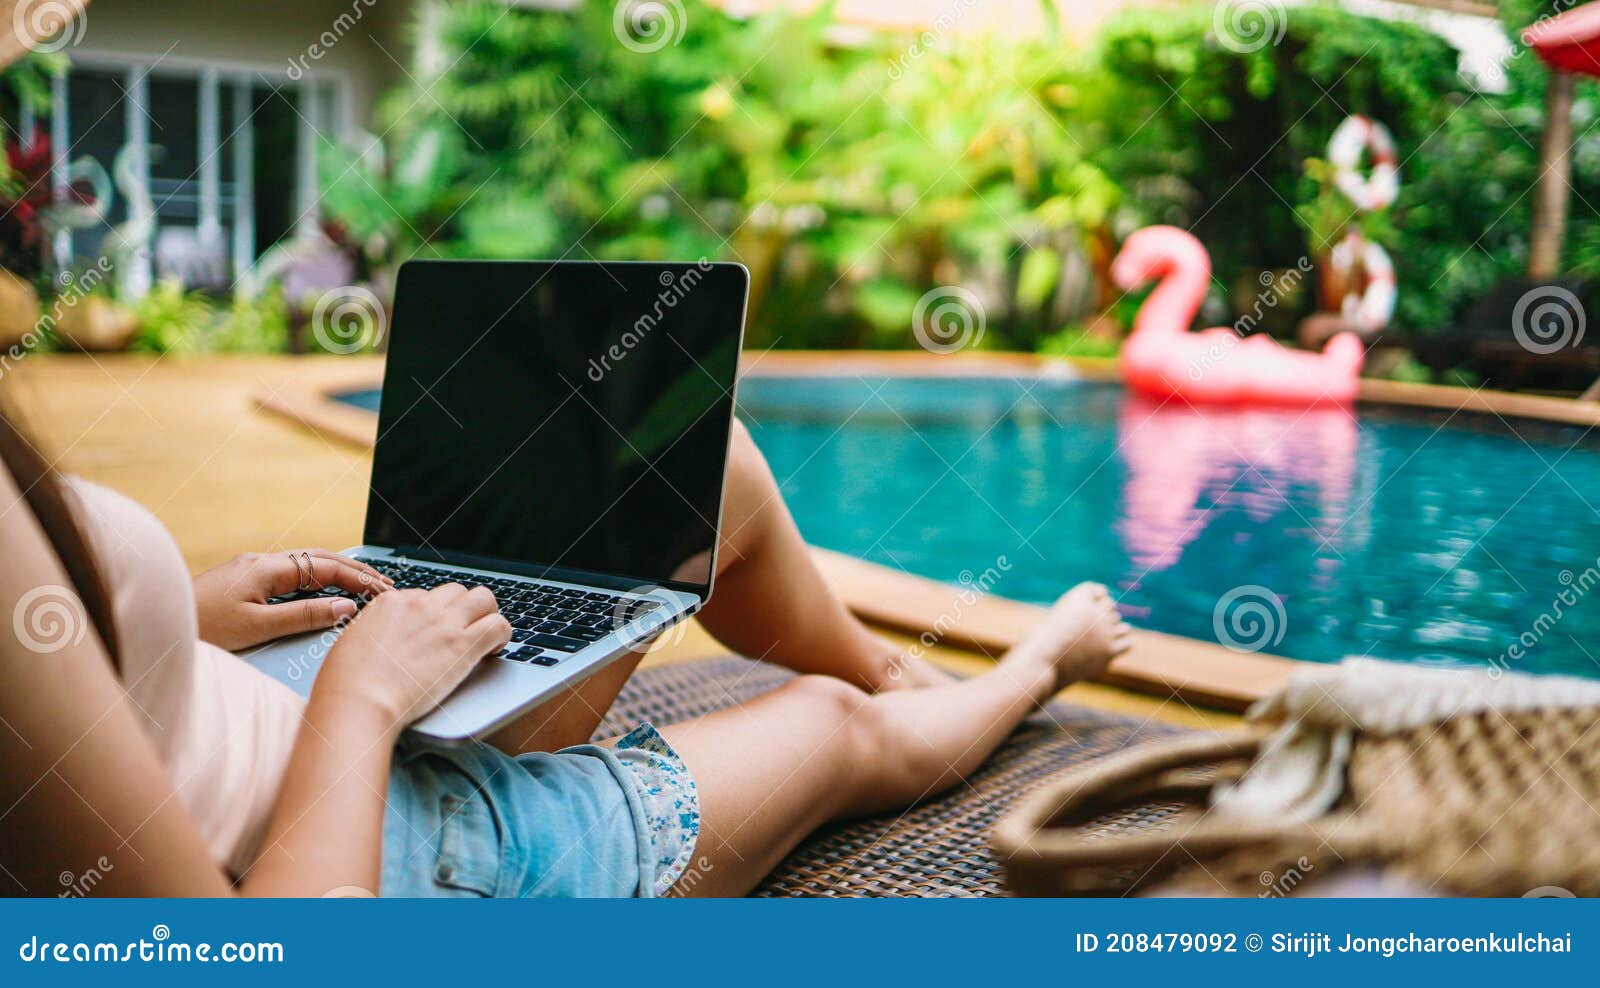 vacation woman working on her laptop in holiday  remote online working digital freelance work concept